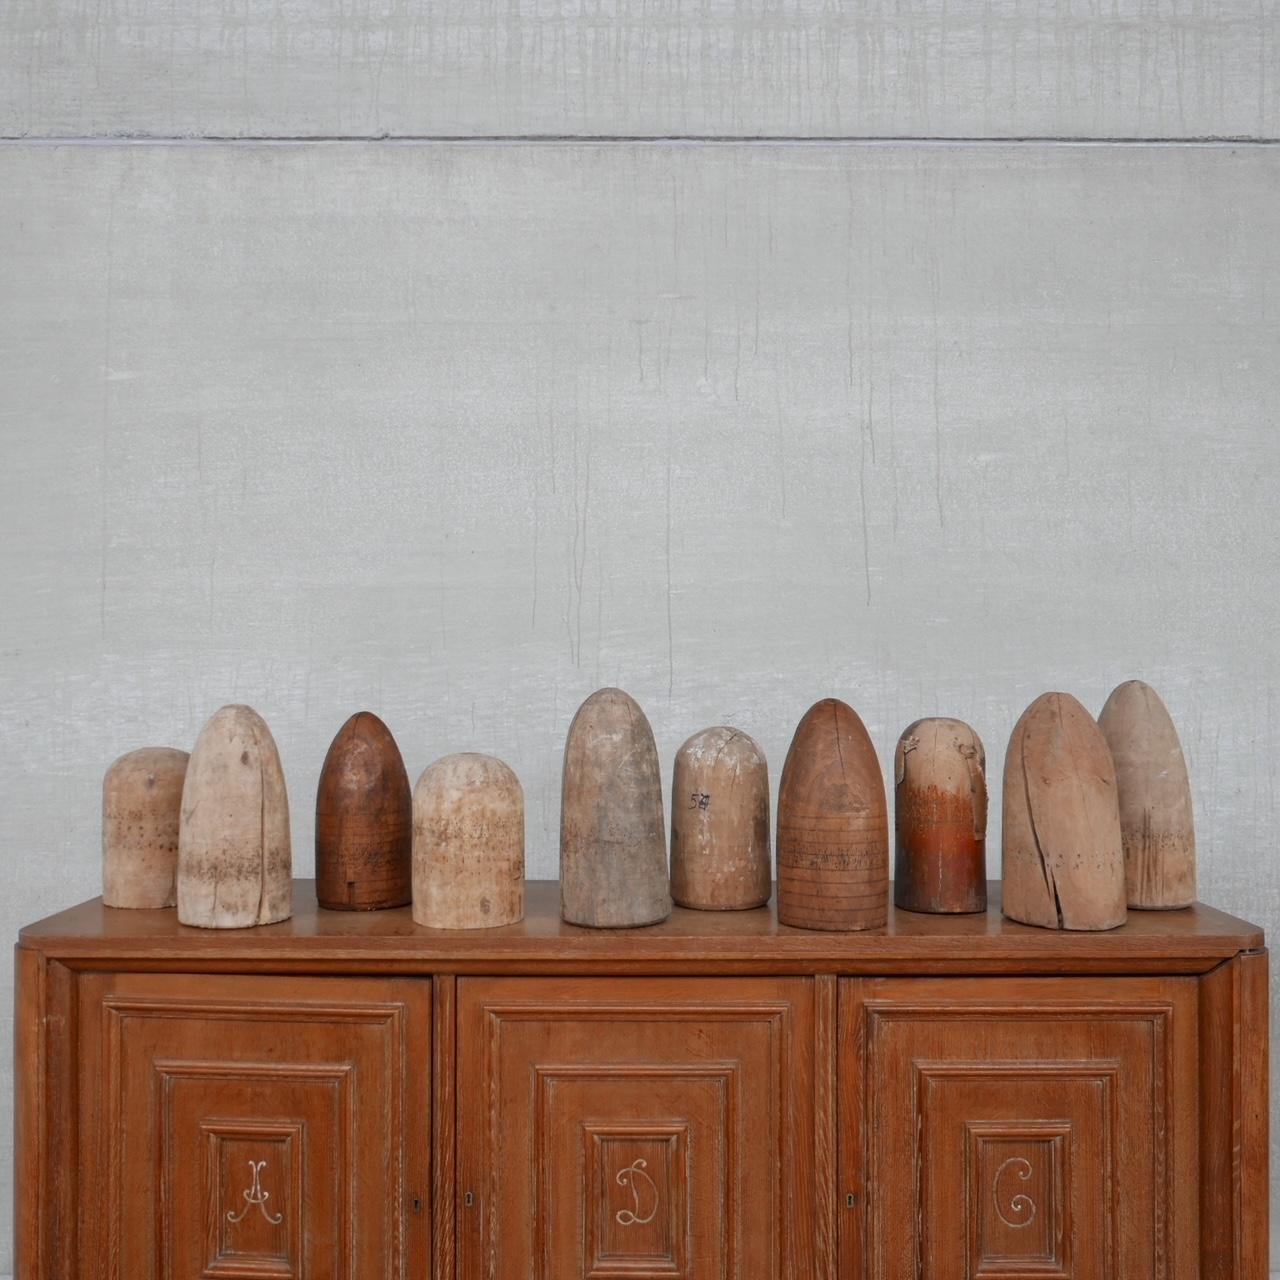 A set of ten decorative wooden molds likely of millinery origin. 

Varying sizes and shapes these look great in volume as decorative tactile curios. 

France, c1920s. 

Price is for the set of 10 but they could be sold in smaller volumes.